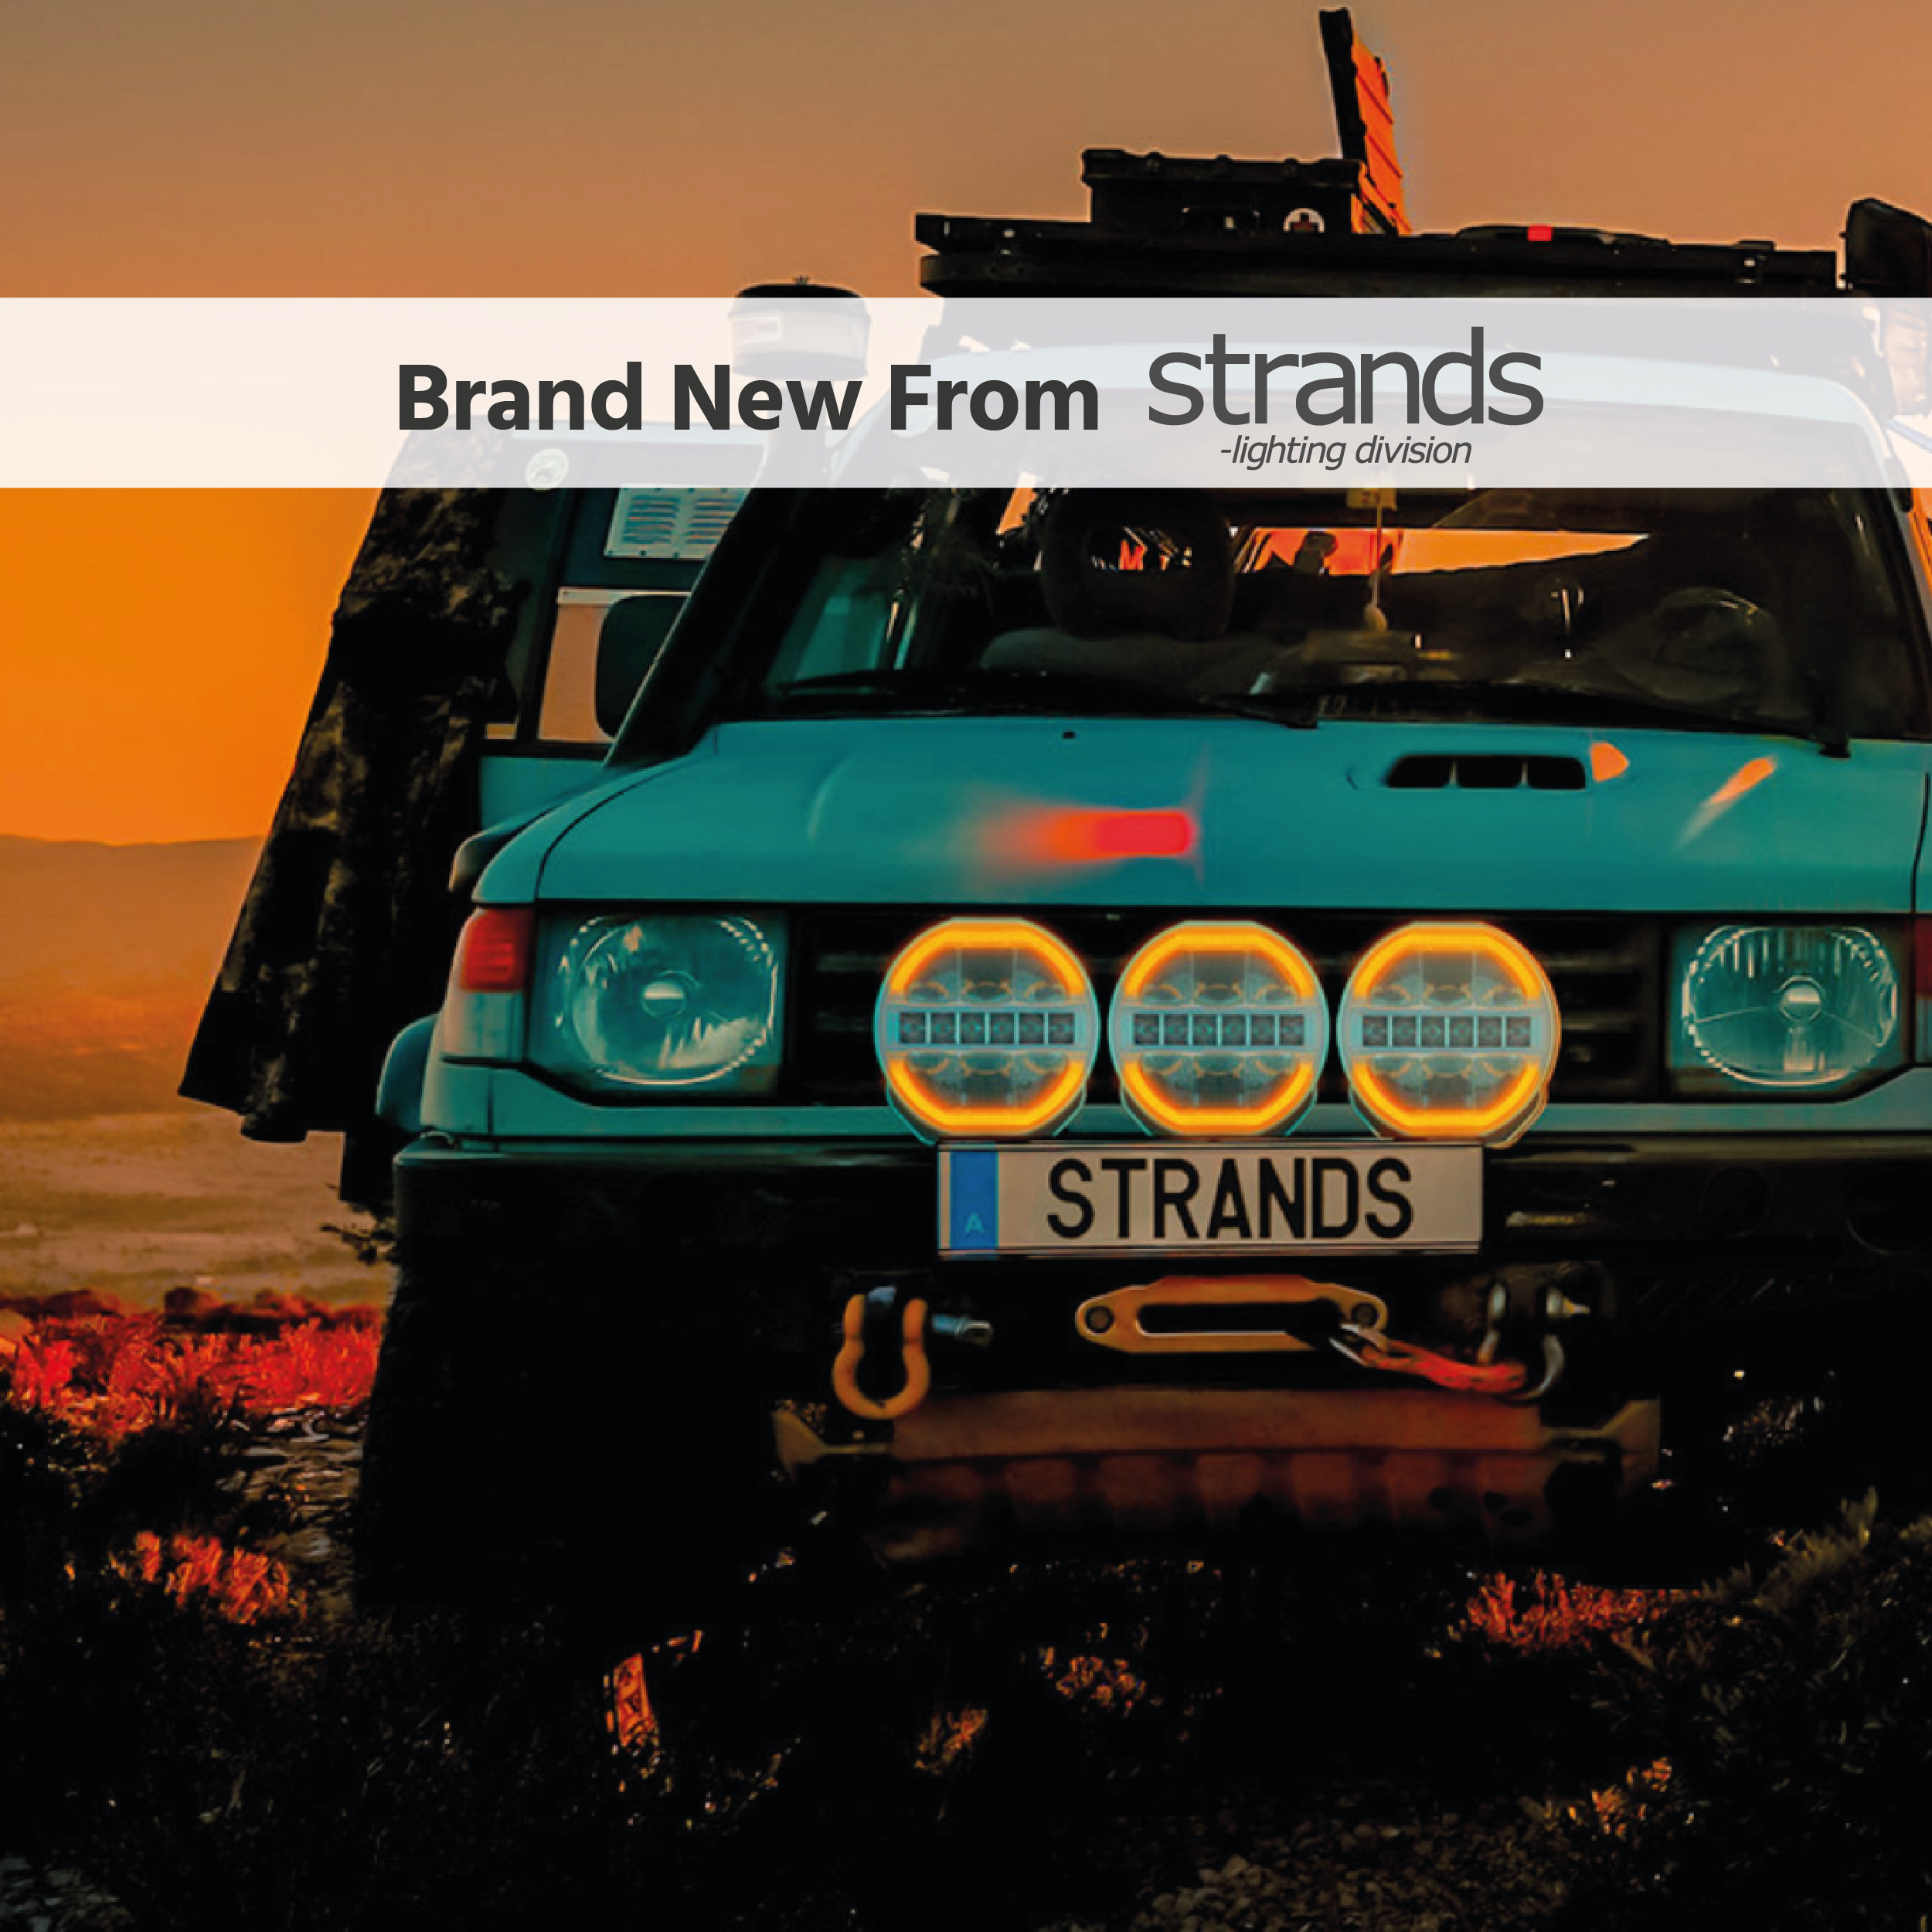 Brand New From Strands!